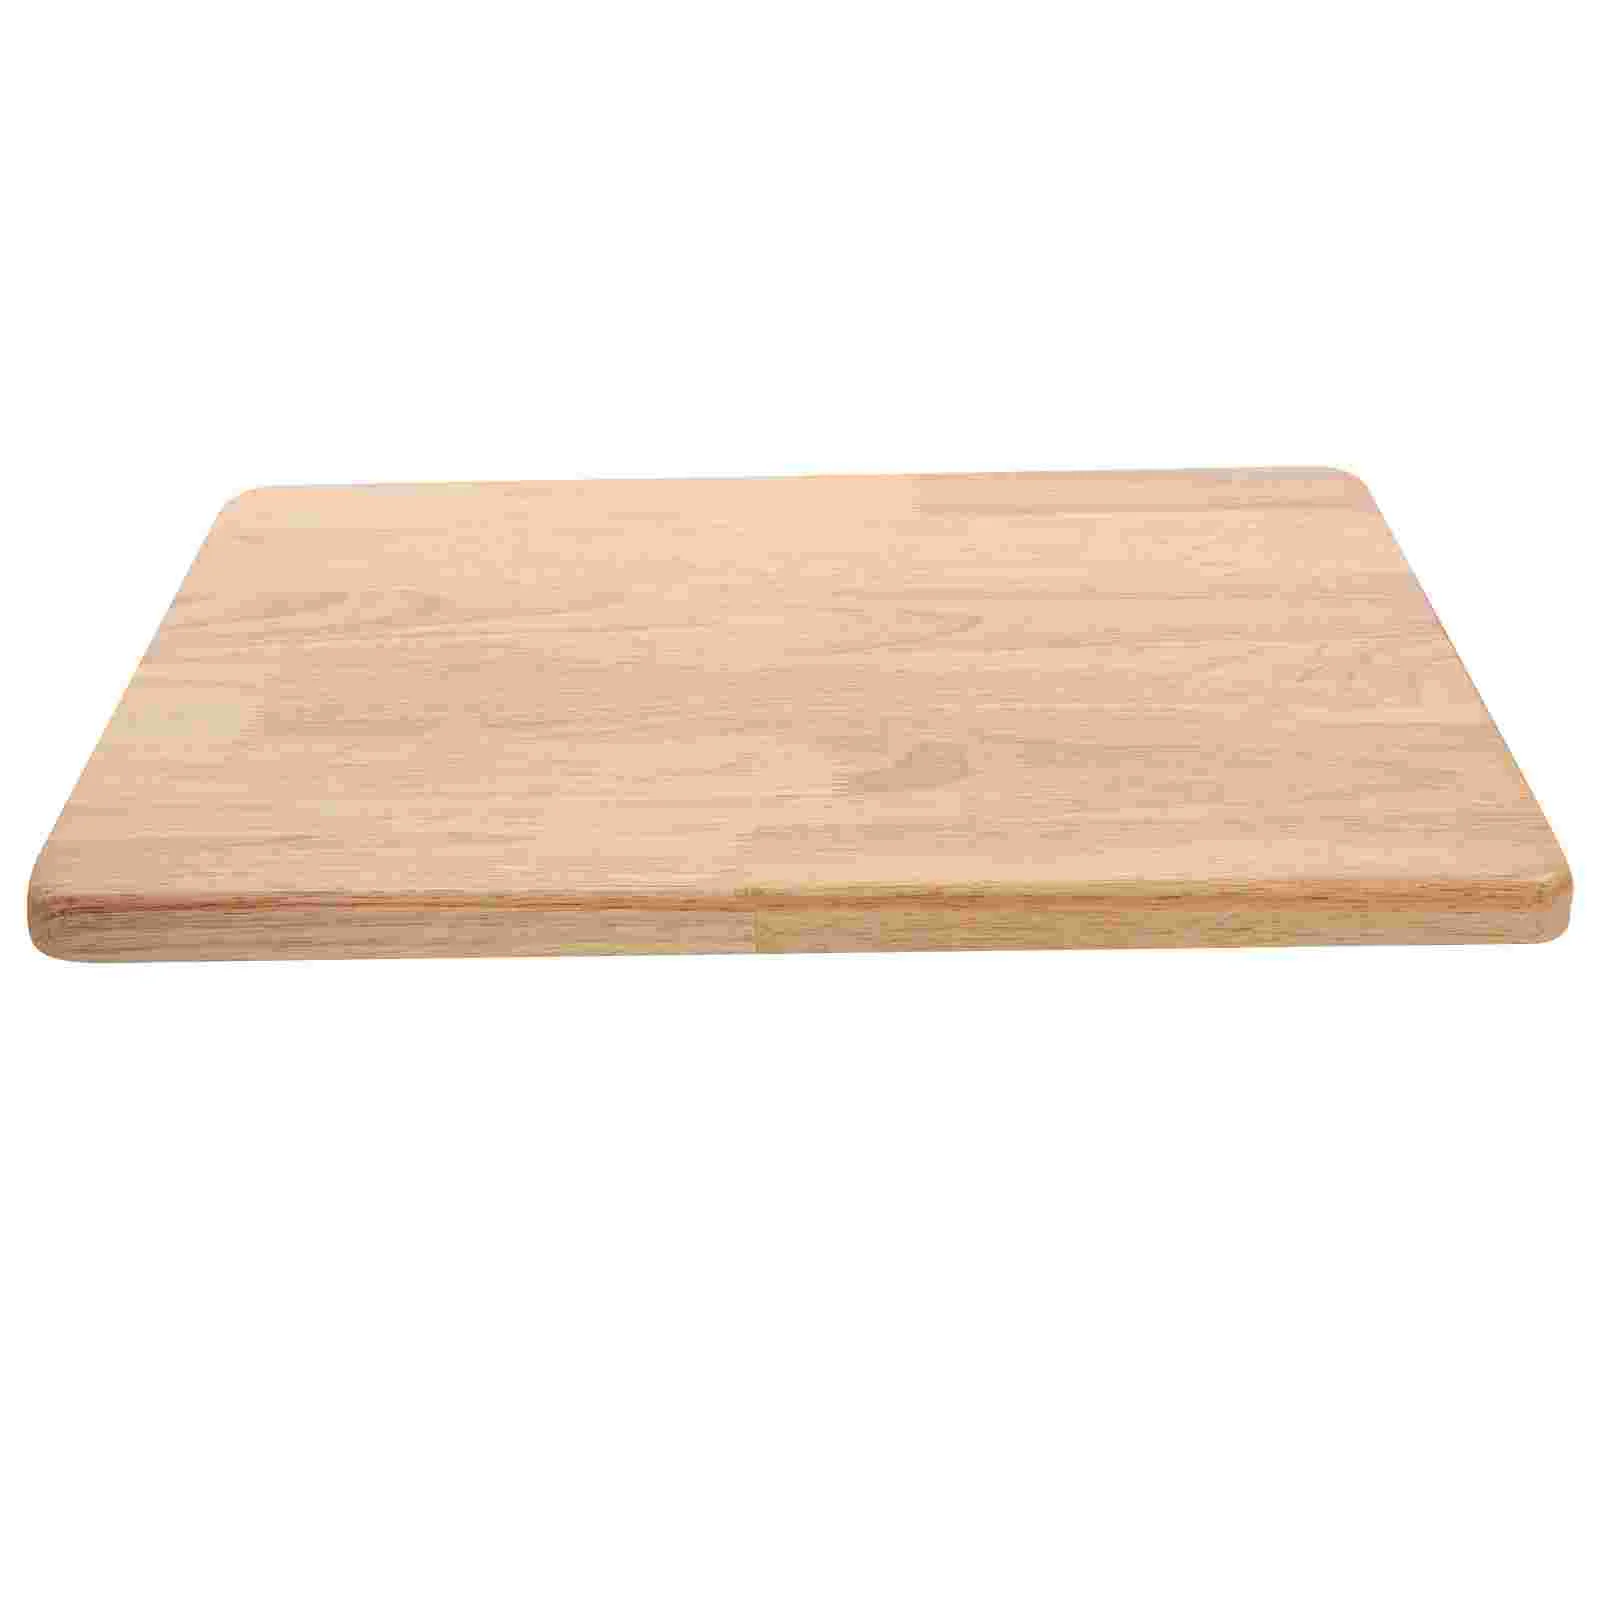 

Wooden Table Top Small Desk Top Natural Wood Coffee Table Top Replacement (40x30cm)